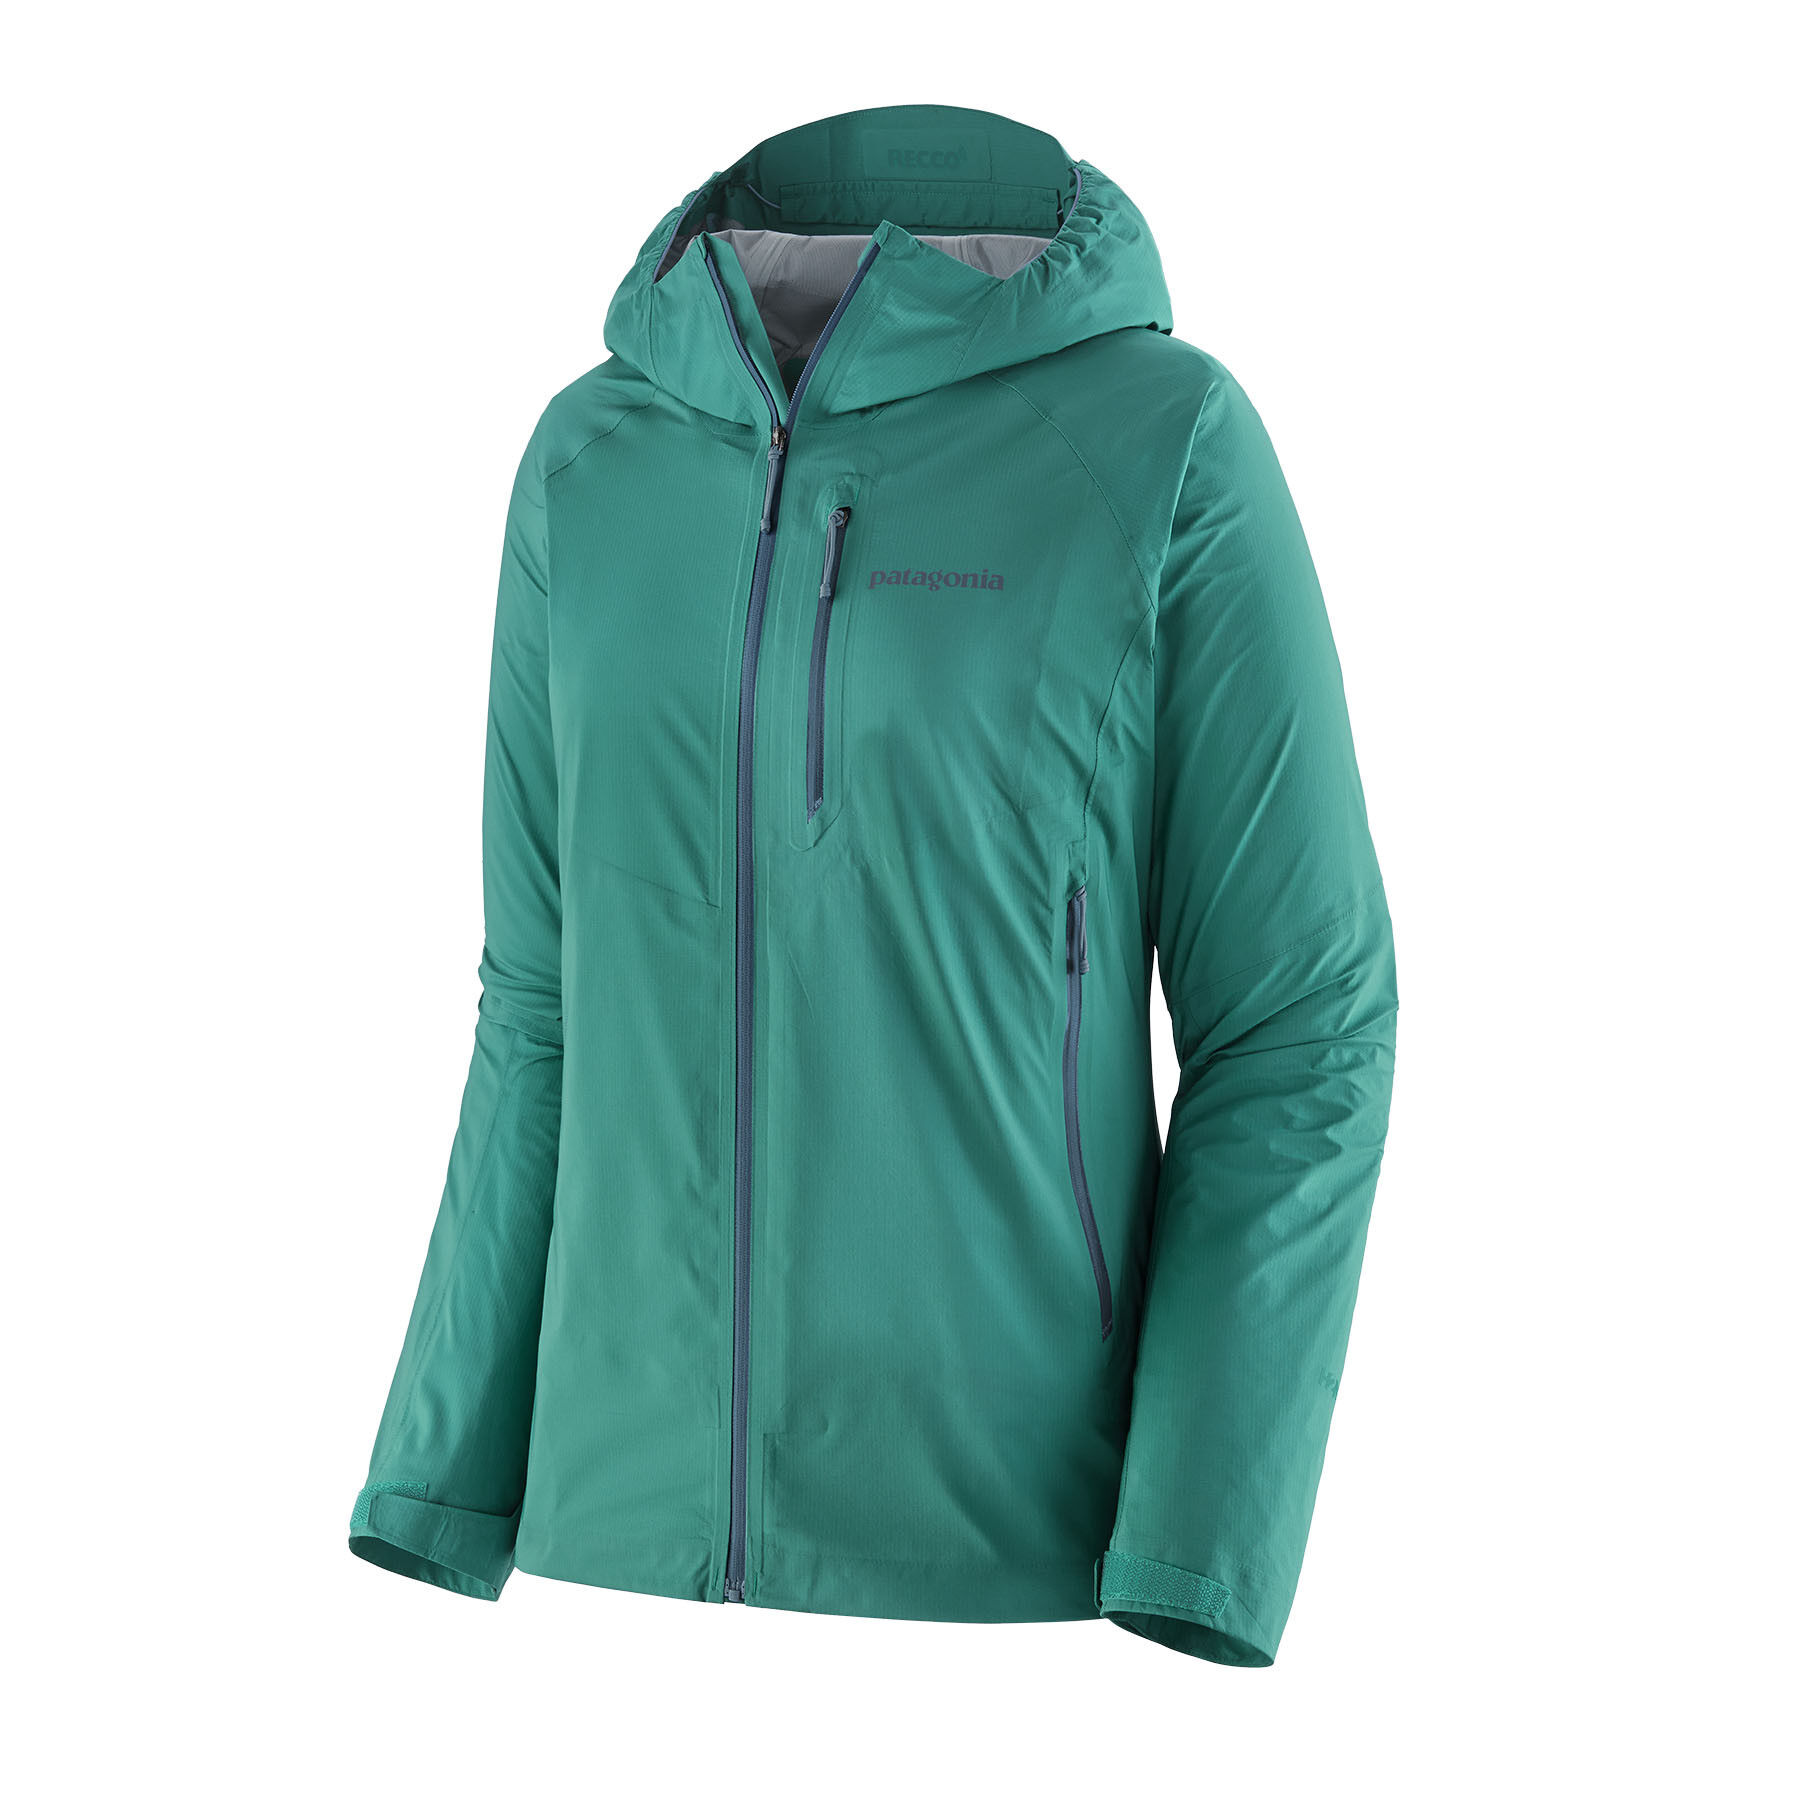 Patagonia Storm10 Jacket - Chaqueta impermeable - Mujer